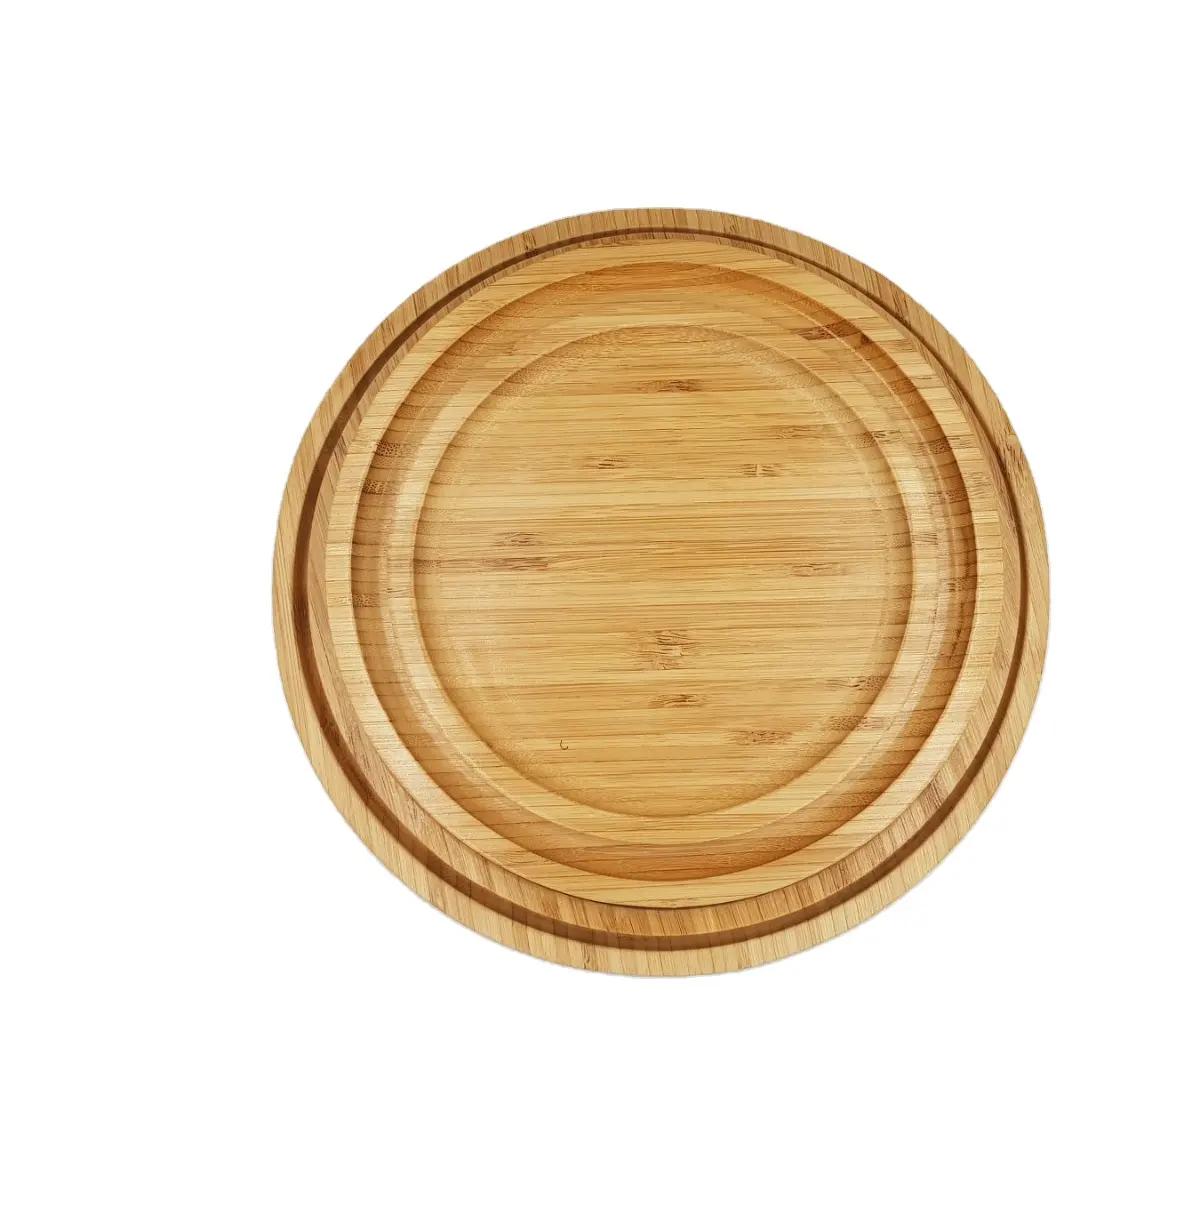 From Vietnam handicraft high quality sale 2022 round multi-function bamboo tray perfect for any space